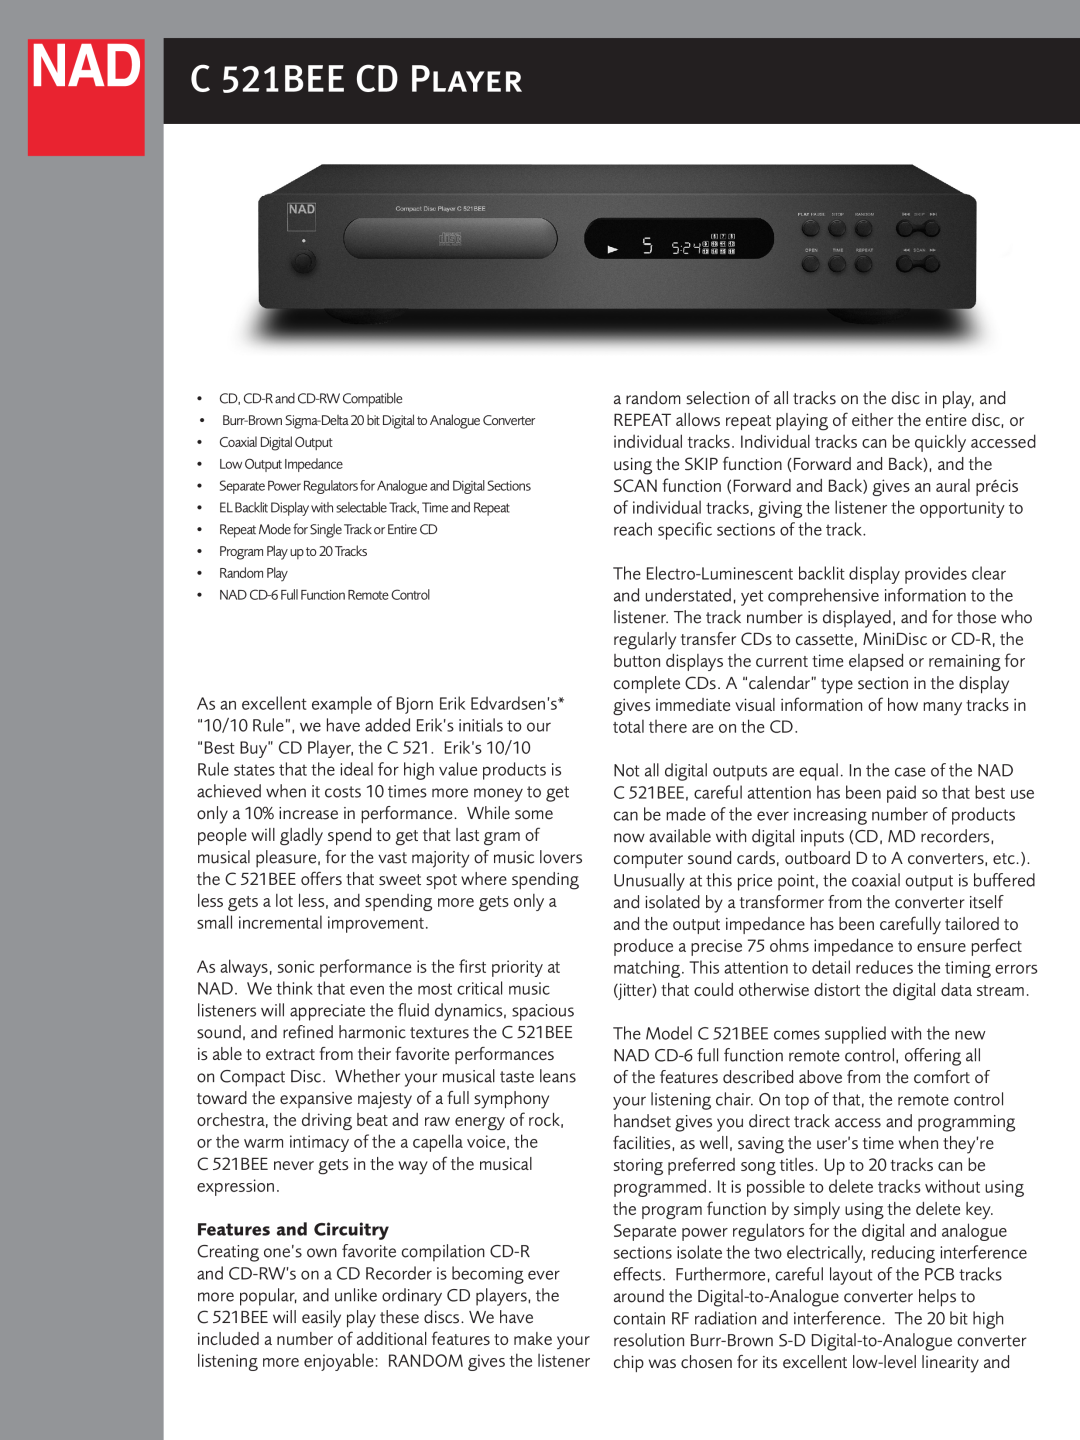 NAD C521BEE manual C 521BEE CD Player, C 521BEE never gets in the way of the musical, expression, Features and Circuitry 